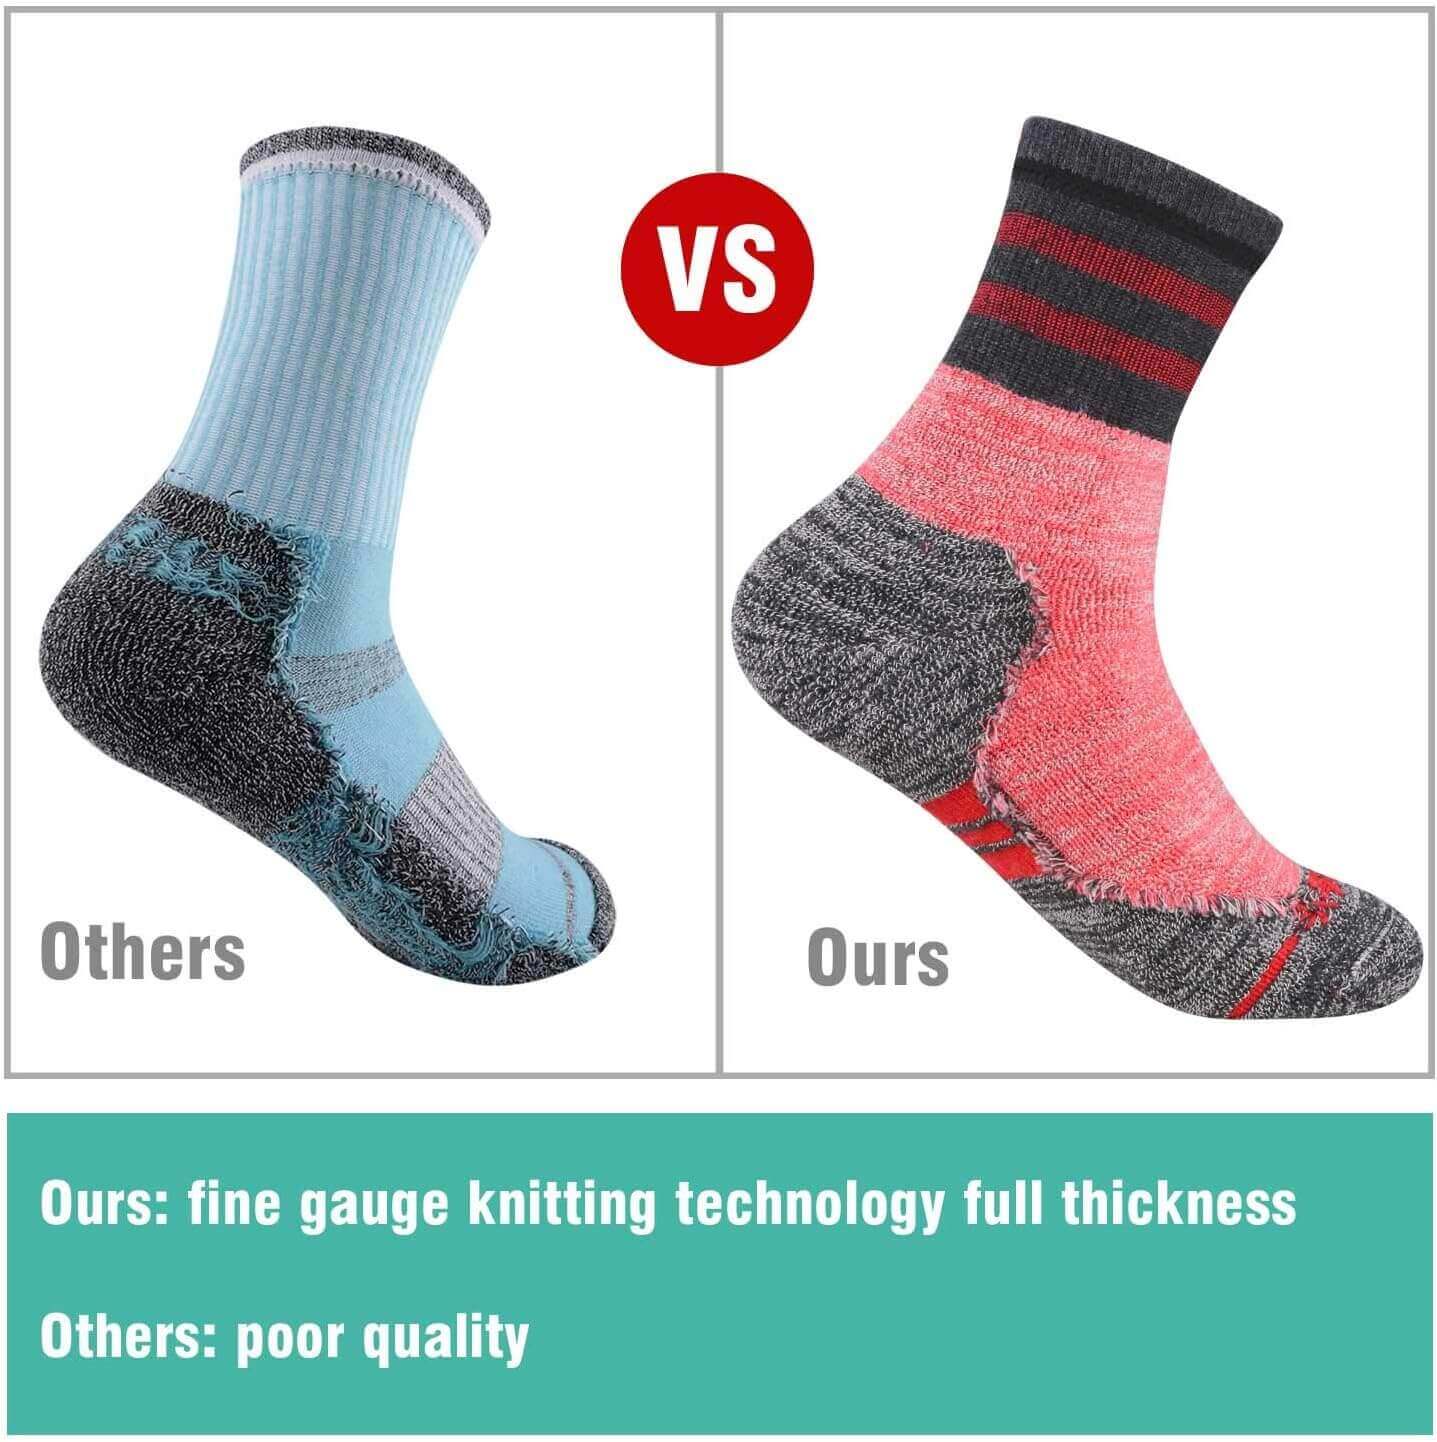 Shop The Latest >Women's Hiking Walking Socks, Multi-pack Outdoor Recreation > *Only $25.64*> From The Top Brand > *FEIDEERl* > Shop Now and Get Free Shipping On Orders Over $45.00 >*Shop Earth Foot*